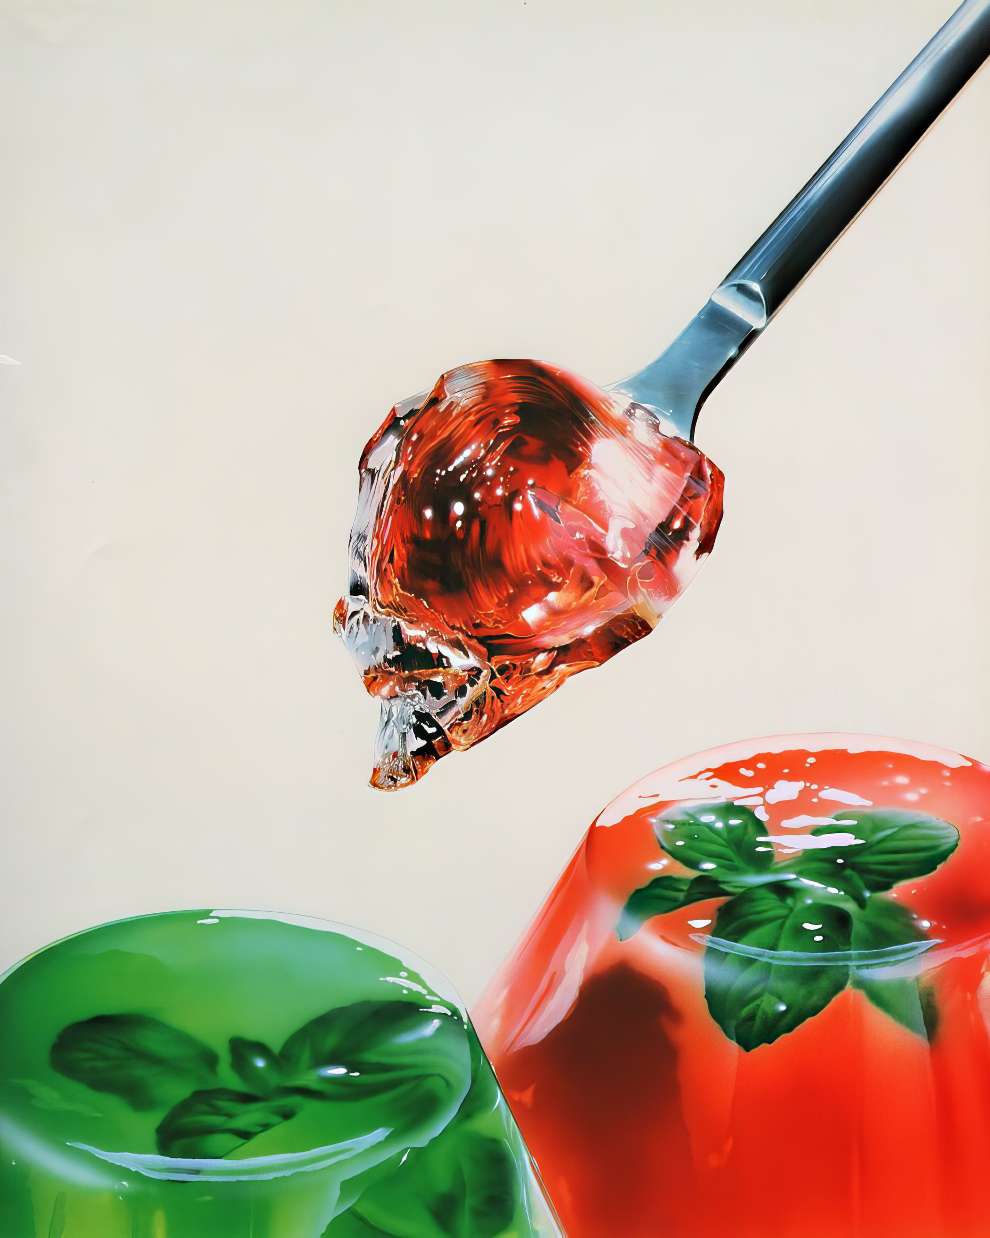 The Superb 1980s Hyper-Realistic Illustrations by Japanese Artist 